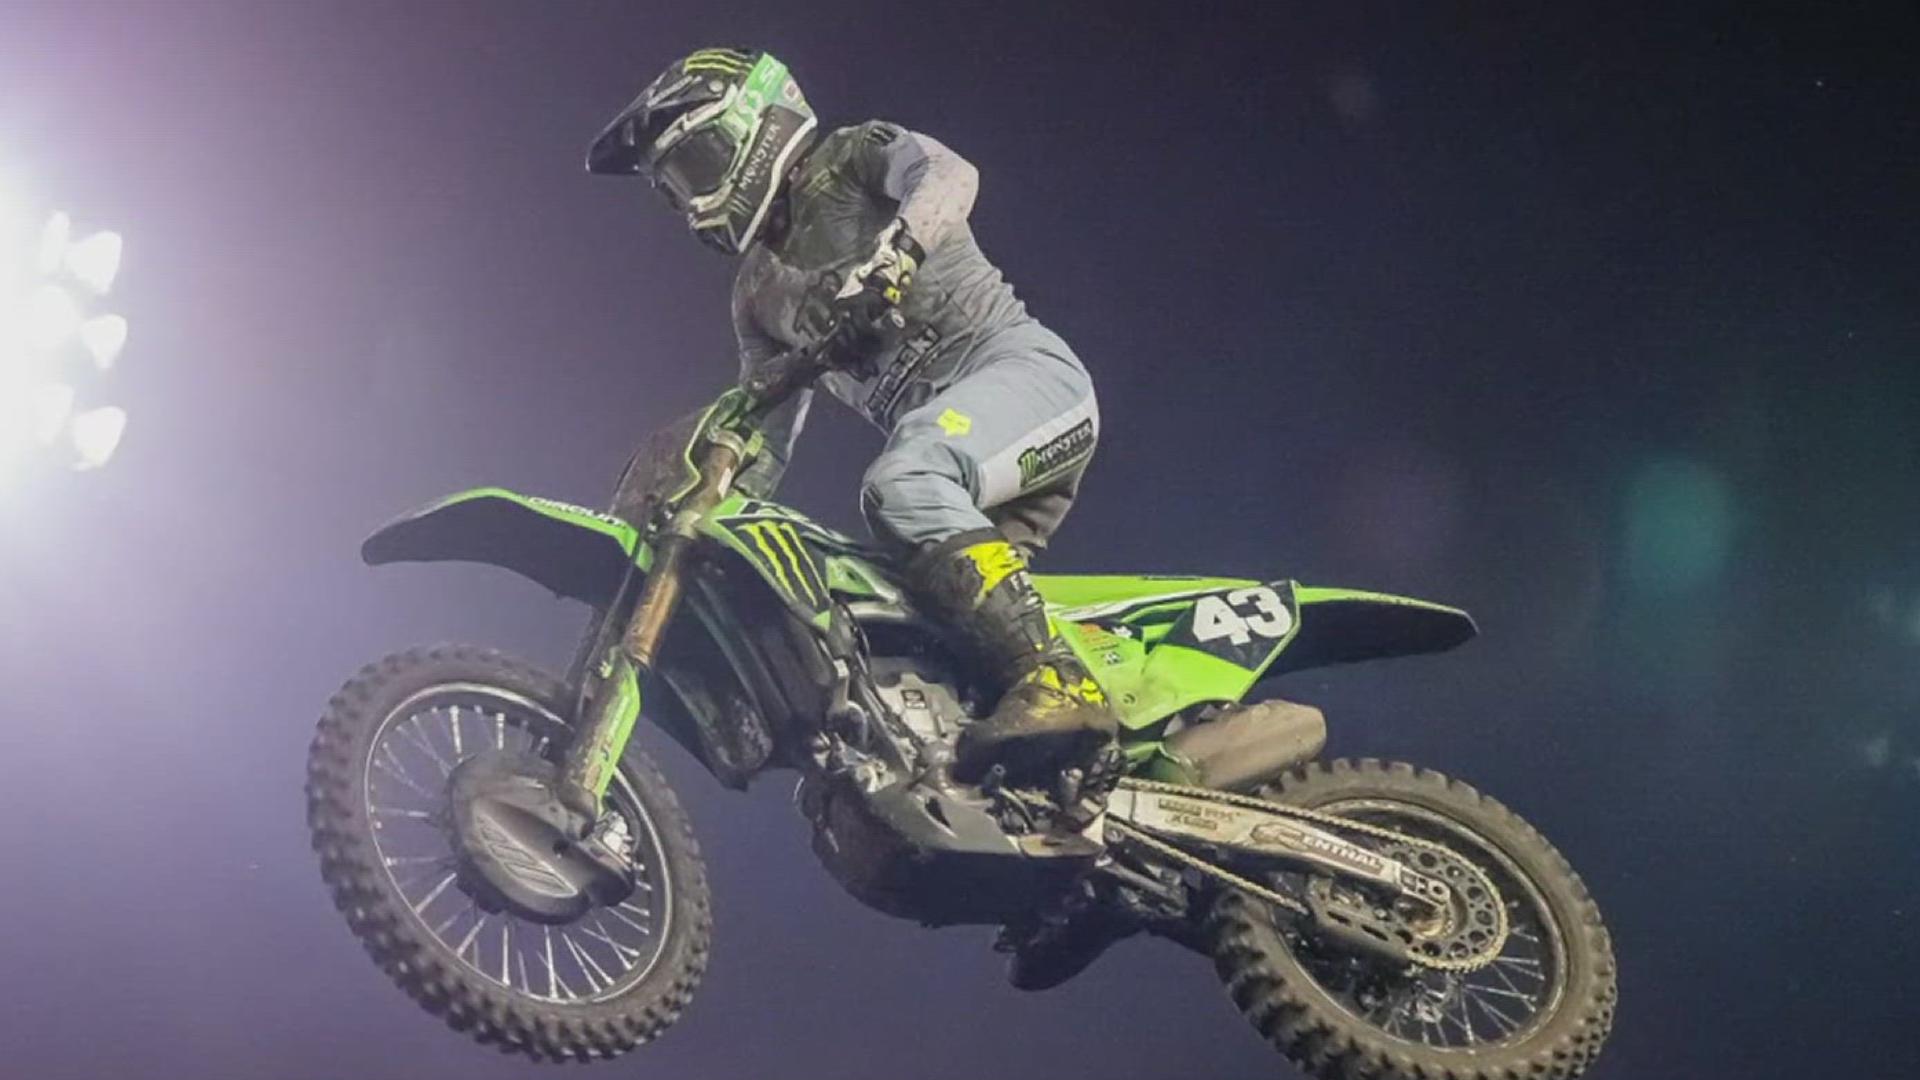 Seth Hammaker, of Bainbridge, Lancaster County, is preparing for a trip to Philadelphia to compete in the Monster Energy AMA Supercross Competition.